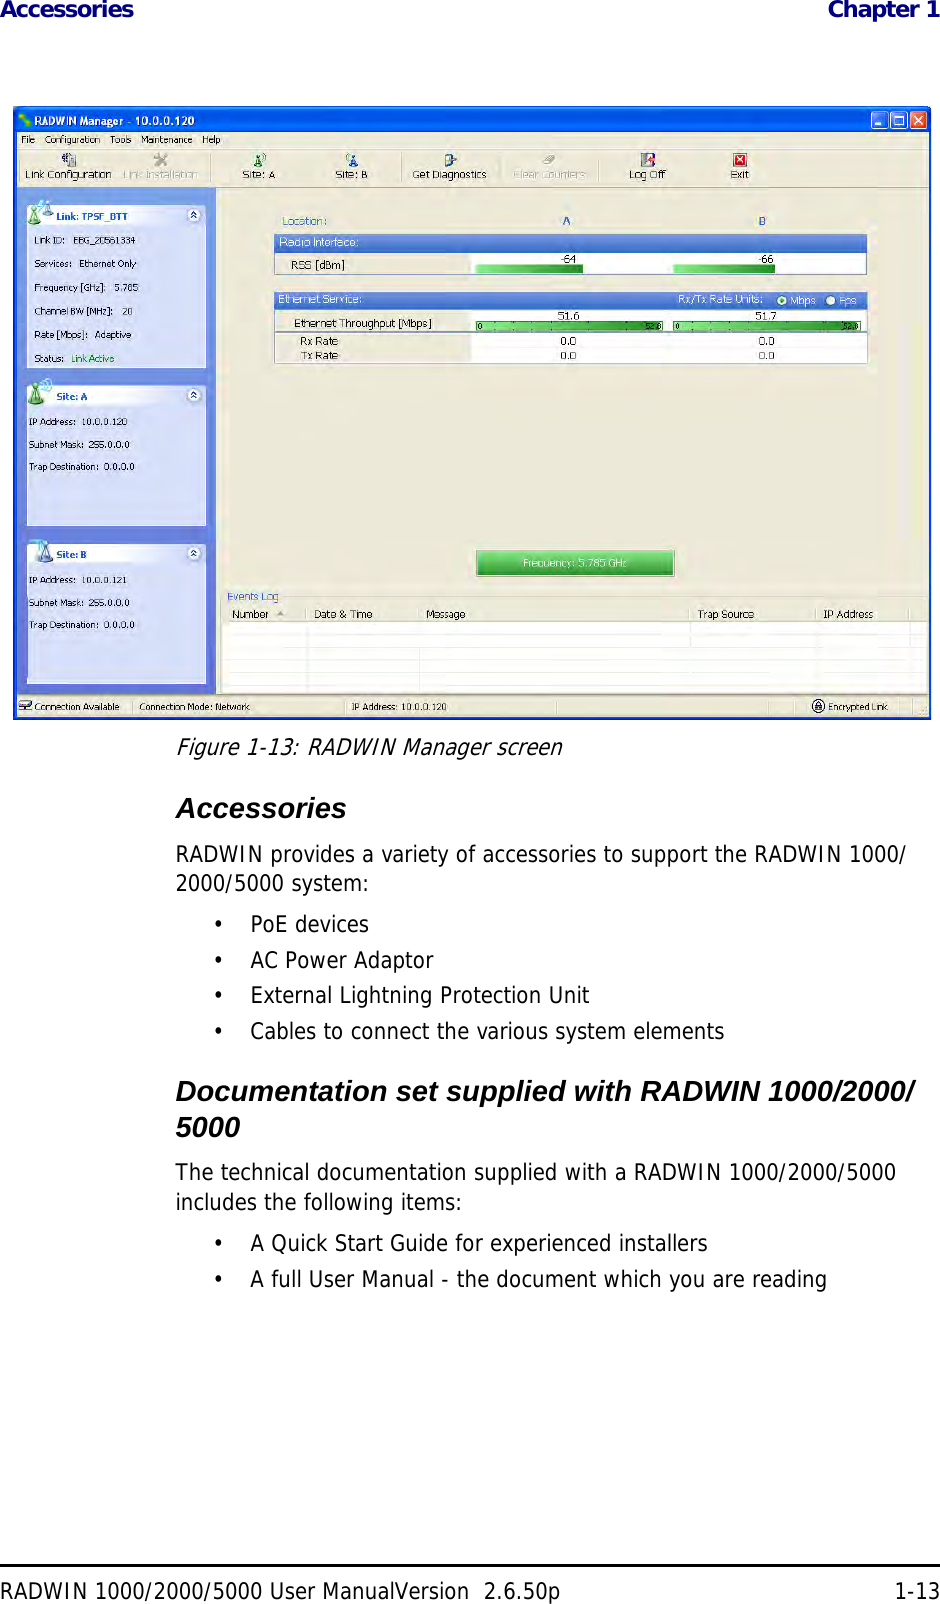 Accessories  Chapter 1RADWIN 1000/2000/5000 User ManualVersion  2.6.50p 1-13Figure 1-13: RADWIN Manager screenAccessoriesRADWIN provides a variety of accessories to support the RADWIN 1000/2000/5000 system:•PoE devices•AC Power Adaptor• External Lightning Protection Unit• Cables to connect the various system elementsDocumentation set supplied with RADWIN 1000/2000/5000The technical documentation supplied with a RADWIN 1000/2000/5000 includes the following items:• A Quick Start Guide for experienced installers• A full User Manual - the document which you are reading